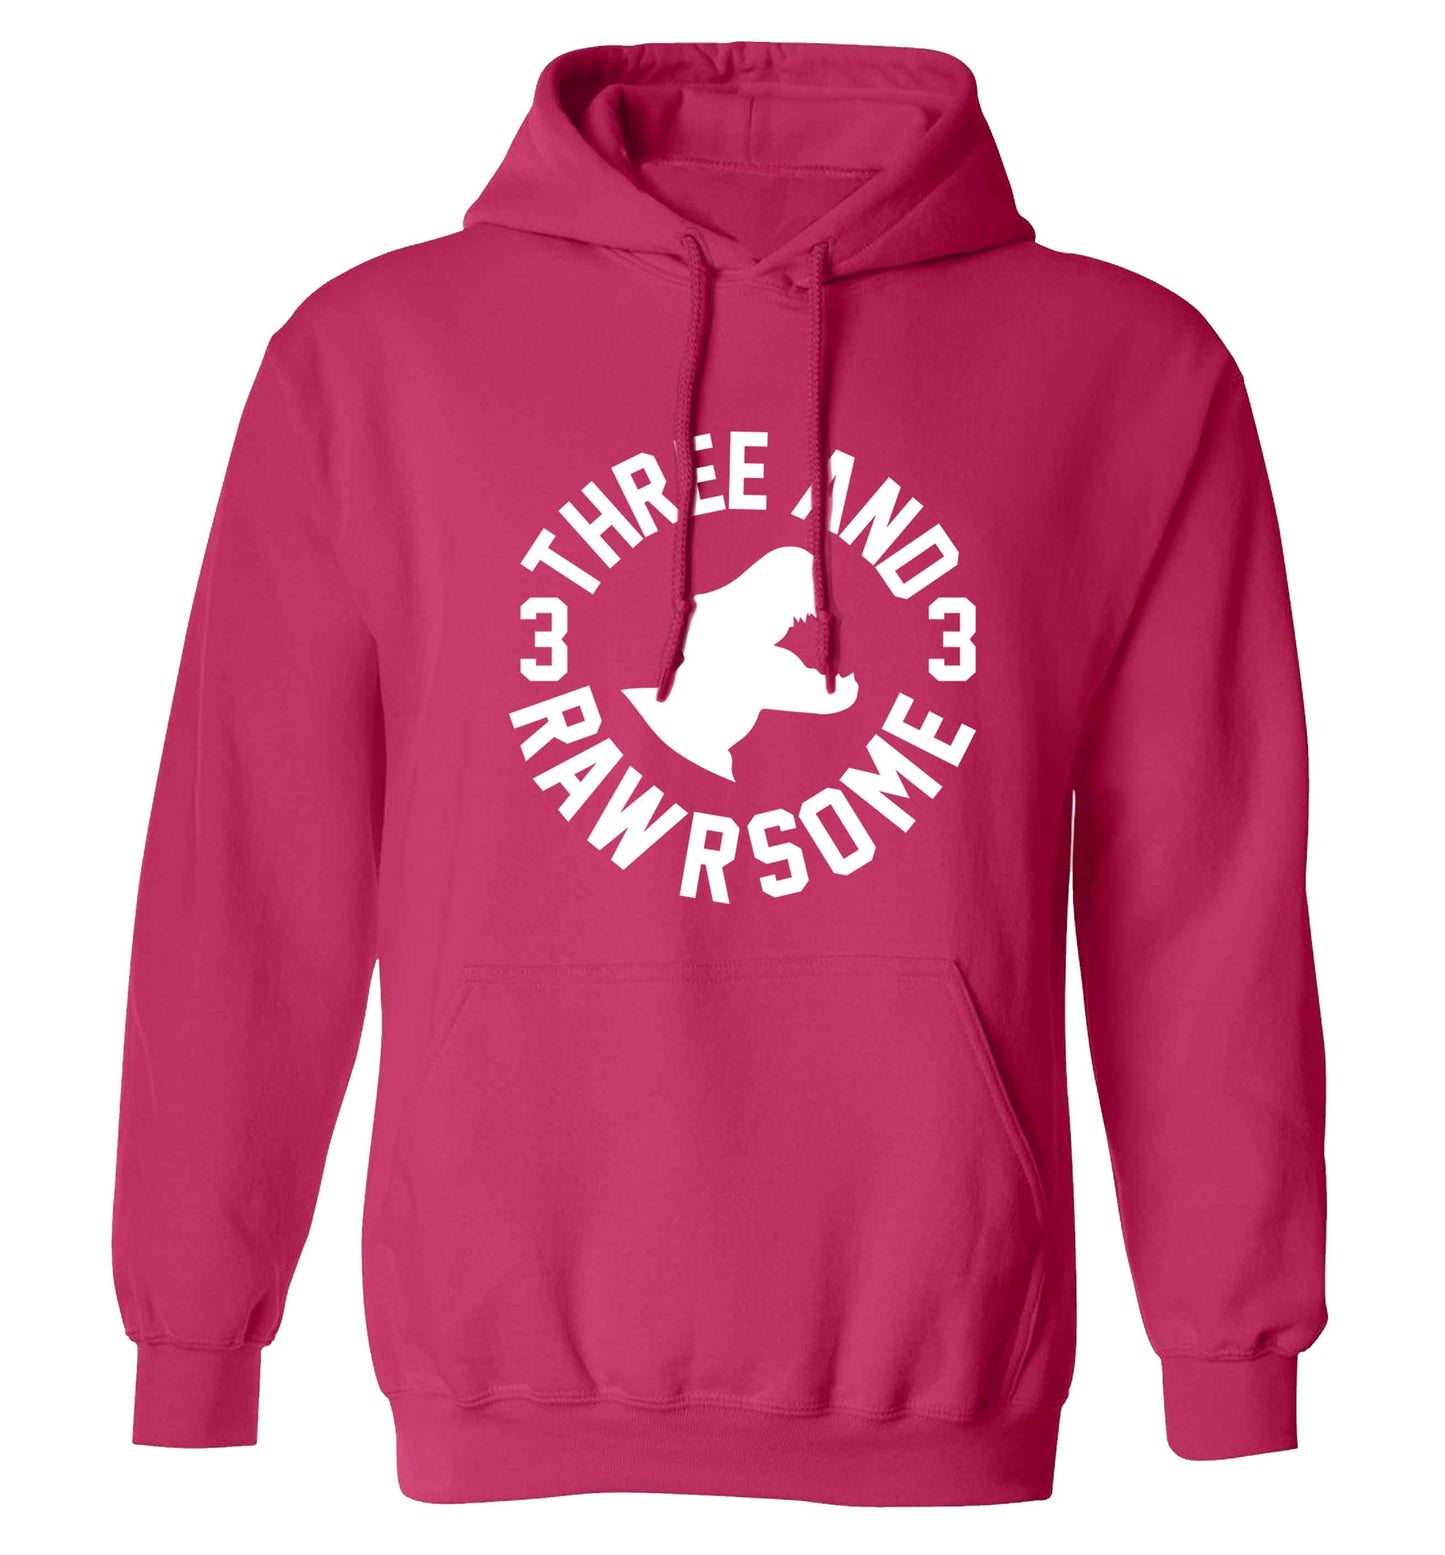 Three and rawrsome adults unisex pink hoodie 2XL